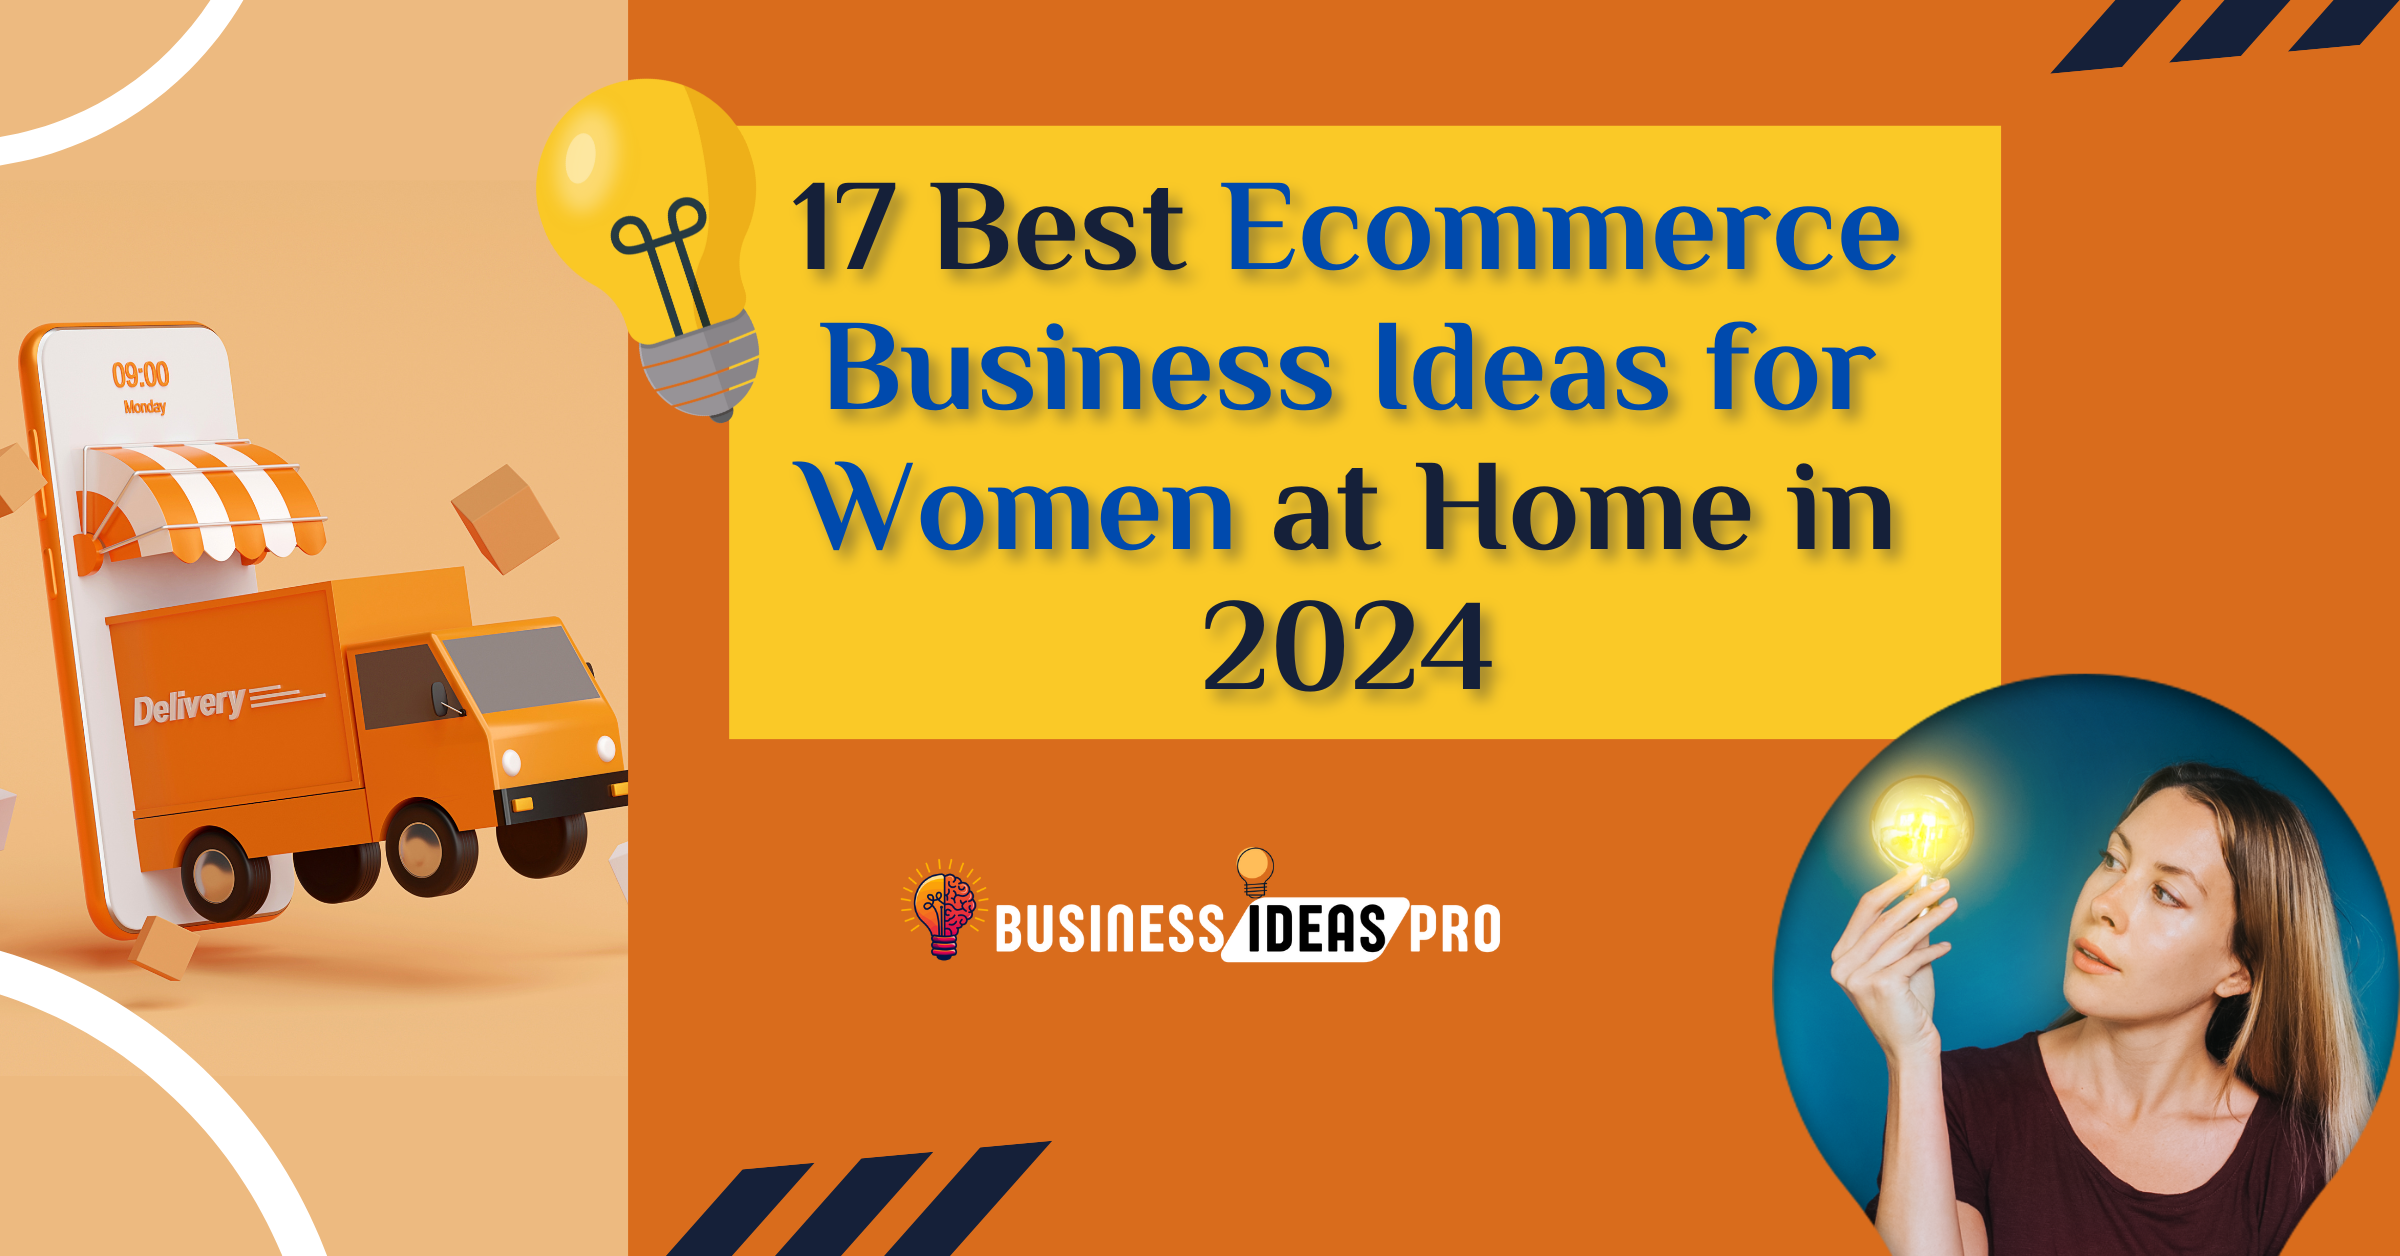 17 Best Ecommerce Business Ideas for Women at Home in 2024